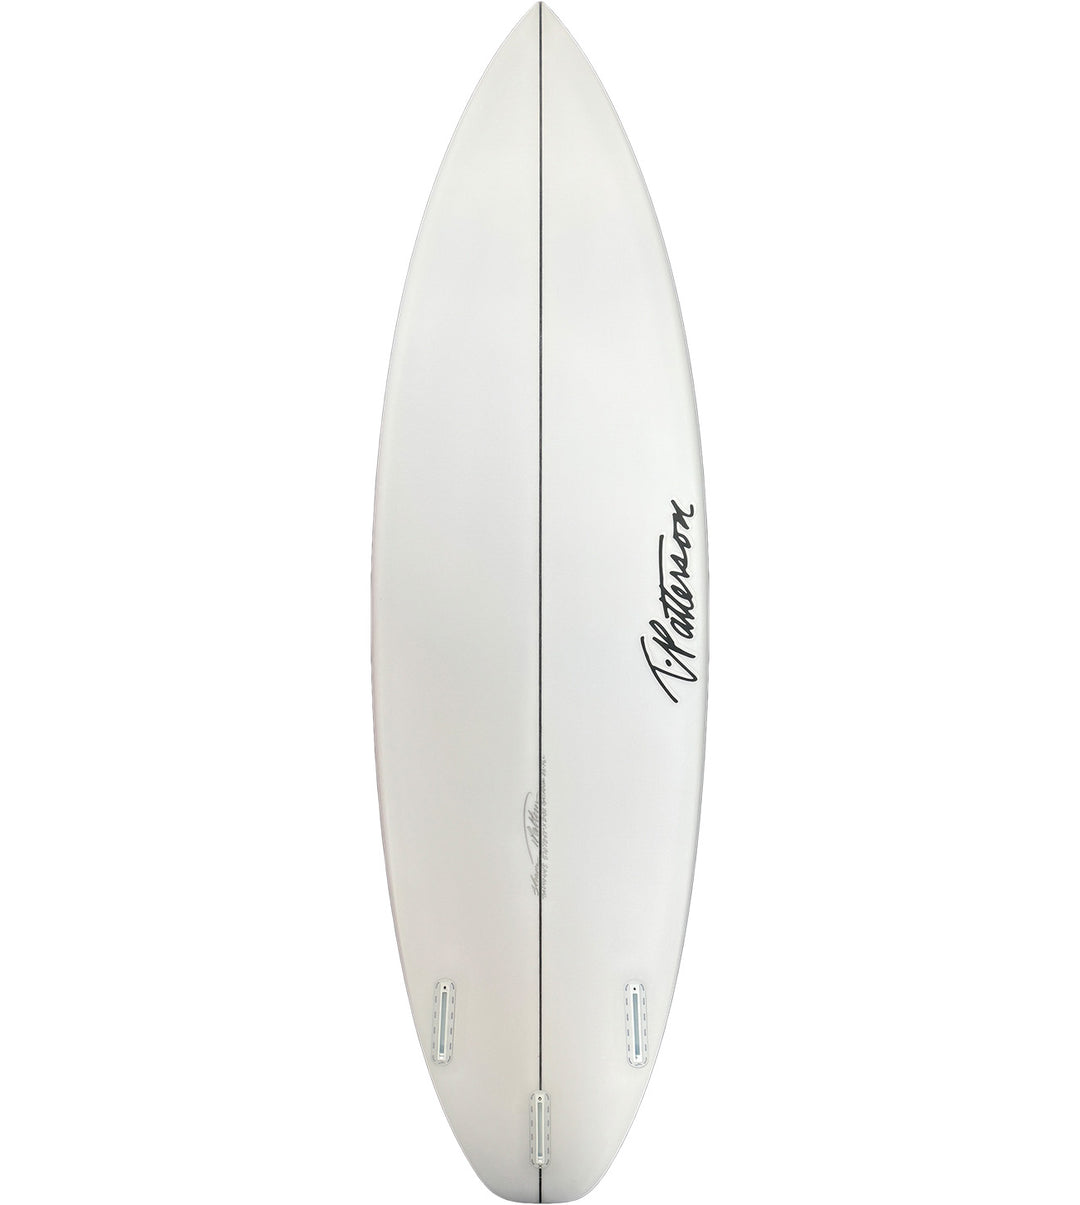 TPatterson Surfboard
TP Gas Pedal/Futures 5'10'' #TA240445